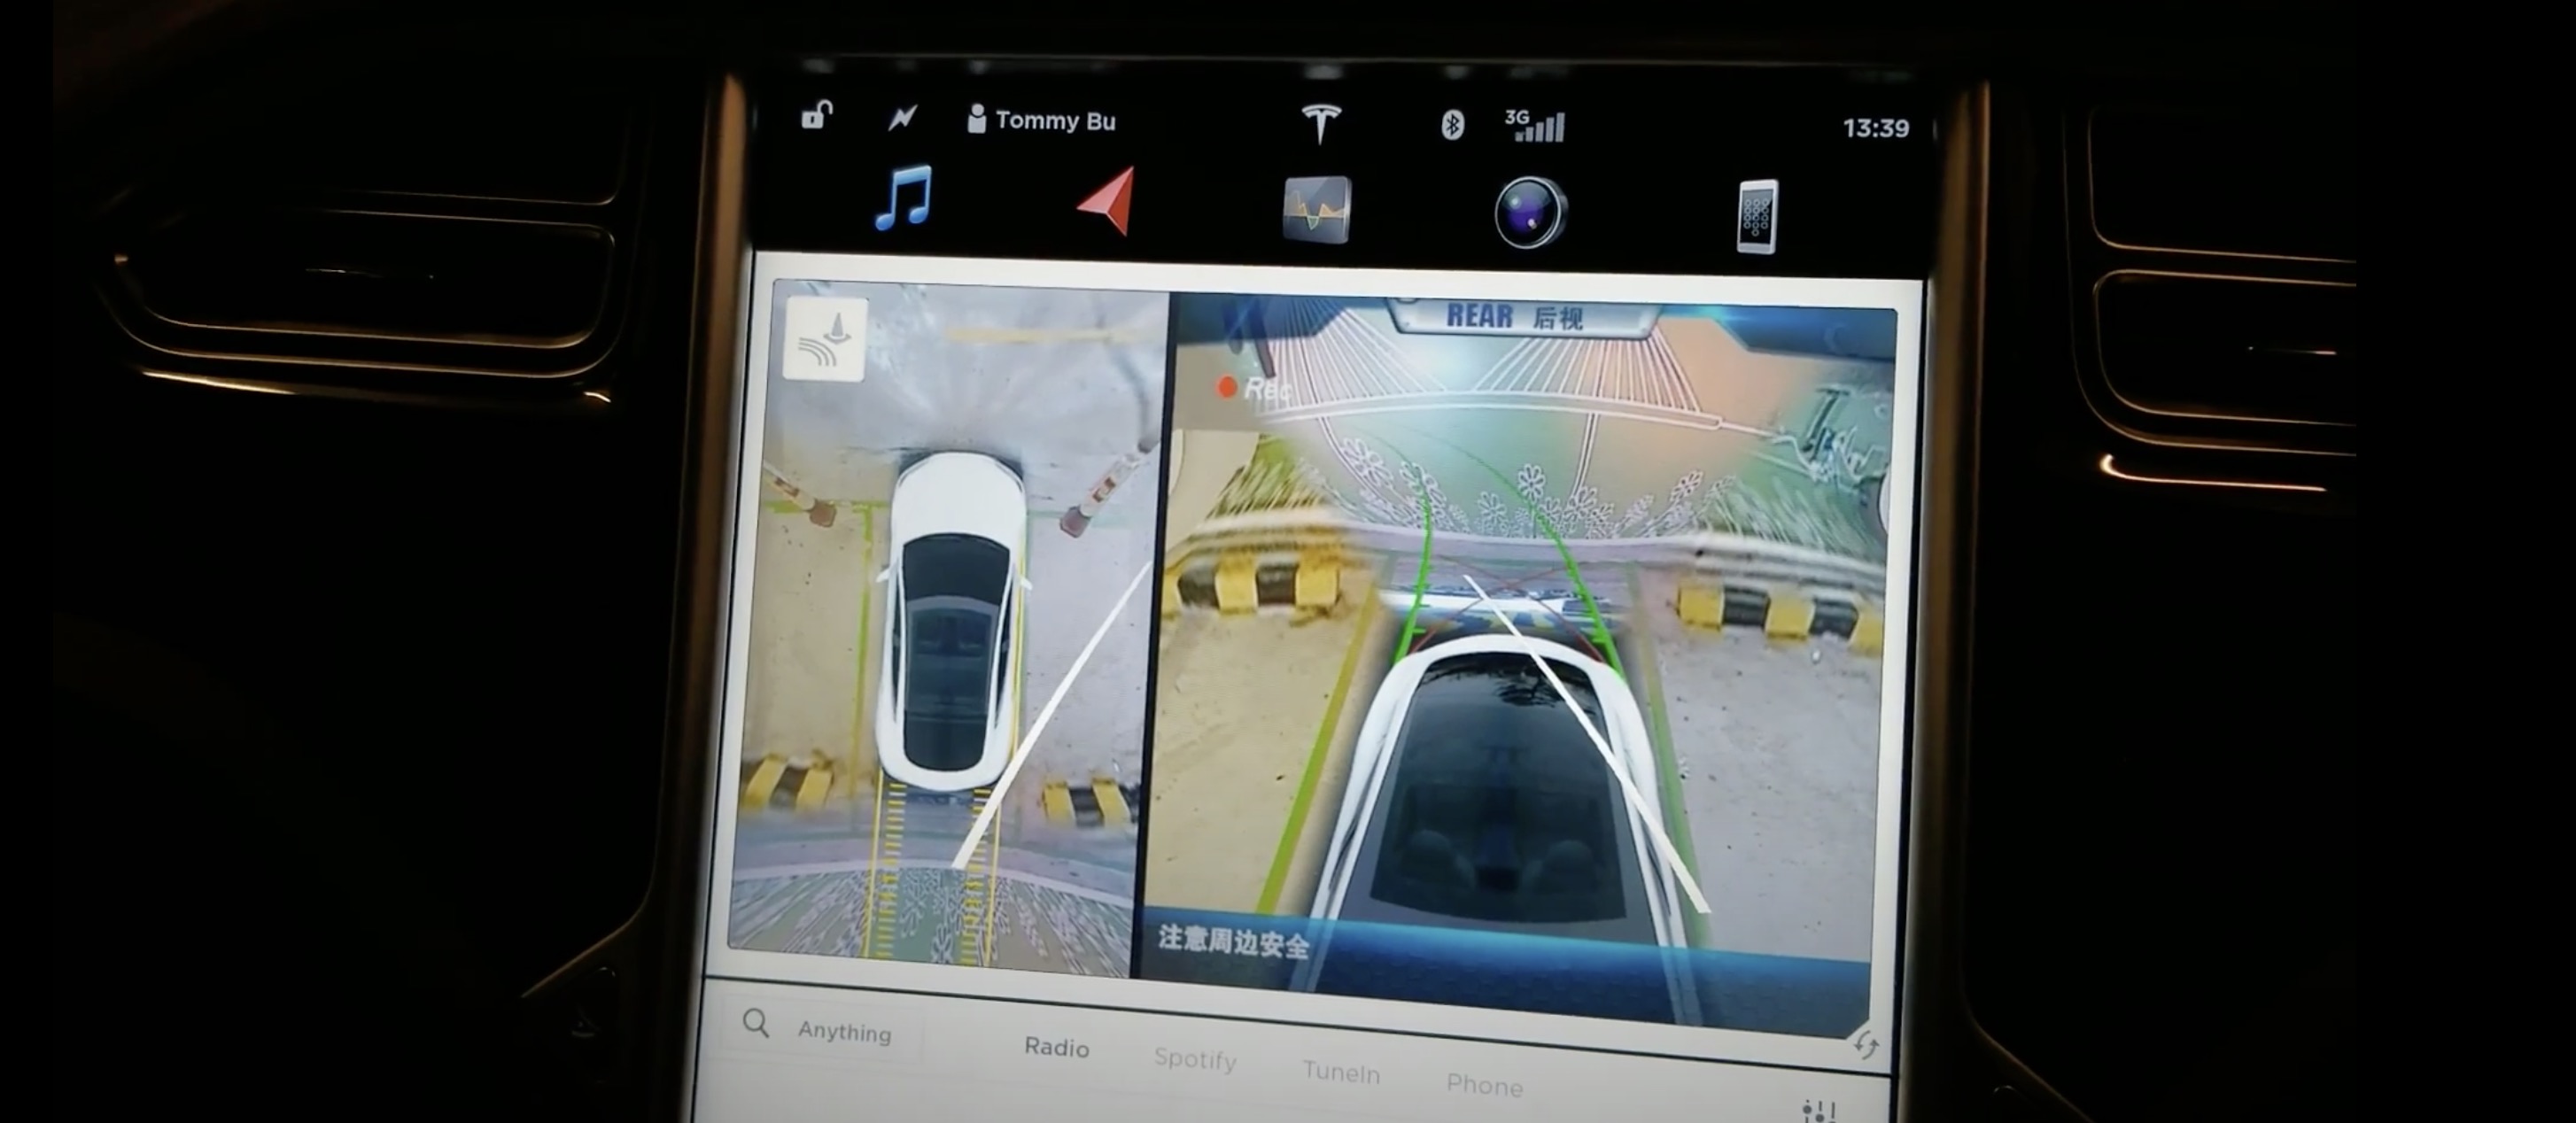 How Does a 360 Degree View Car Camera Work?